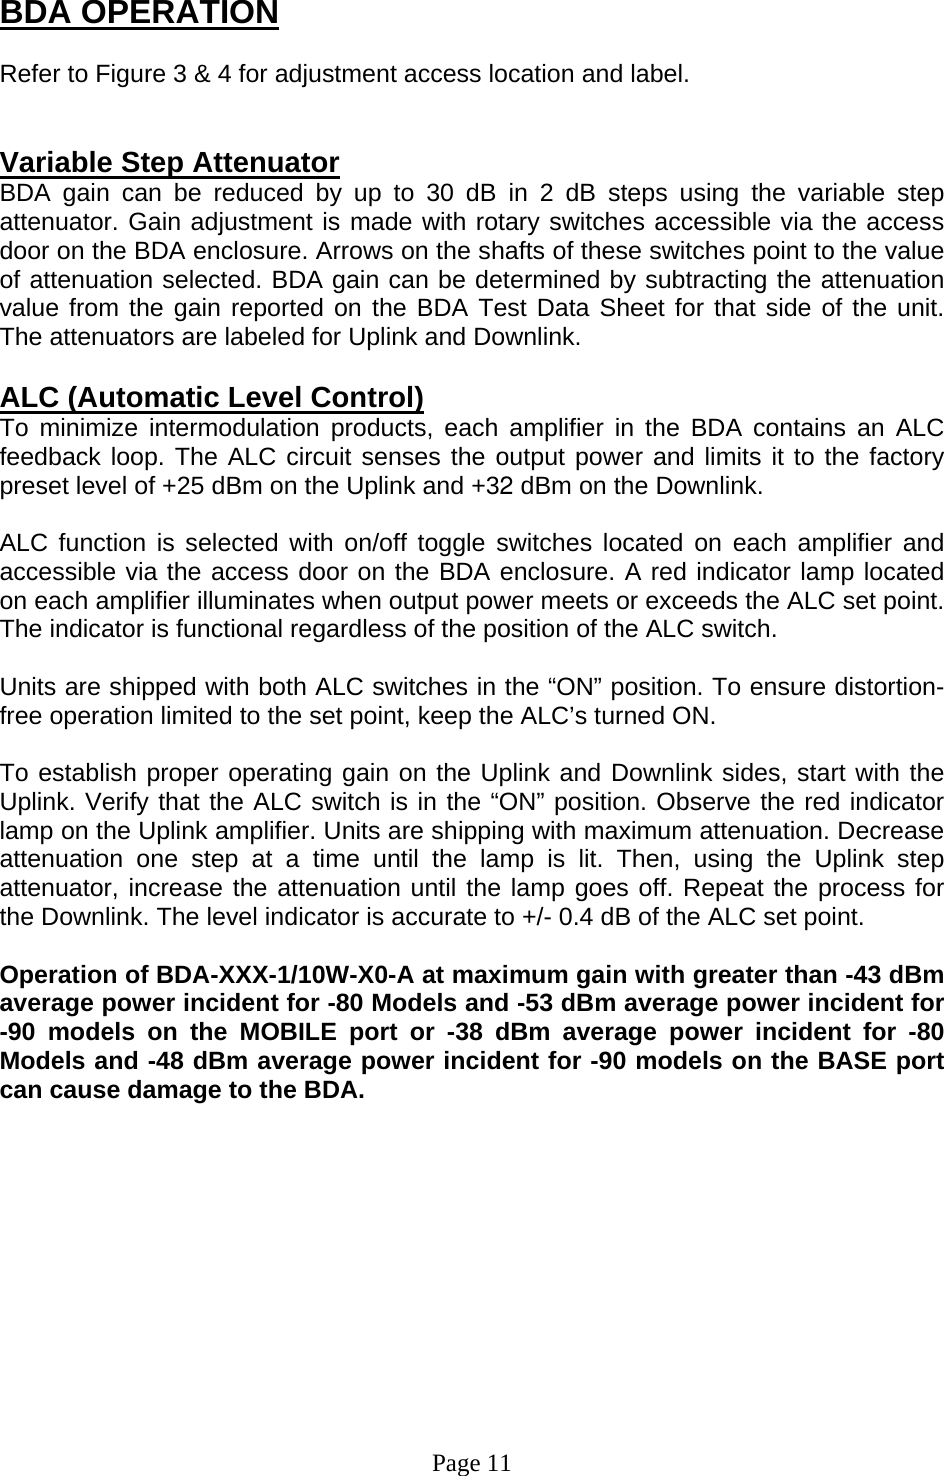 BDA OPERATION  Refer to Figure 3 &amp; 4 for adjustment access location and label.   Variable Step Attenuator BDA gain can be reduced by up to 30 dB in 2 dB steps using the variable step attenuator. Gain adjustment is made with rotary switches accessible via the access door on the BDA enclosure. Arrows on the shafts of these switches point to the value of attenuation selected. BDA gain can be determined by subtracting the attenuation value from the gain reported on the BDA Test Data Sheet for that side of the unit.  The attenuators are labeled for Uplink and Downlink.   ALC (Automatic Level Control)  To minimize intermodulation products, each amplifier in the BDA contains an ALC feedback loop. The ALC circuit senses the output power and limits it to the factory preset level of +25 dBm on the Uplink and +32 dBm on the Downlink.   ALC function is selected with on/off toggle switches located on each amplifier and accessible via the access door on the BDA enclosure. A red indicator lamp located on each amplifier illuminates when output power meets or exceeds the ALC set point. The indicator is functional regardless of the position of the ALC switch.  Units are shipped with both ALC switches in the “ON” position. To ensure distortion-free operation limited to the set point, keep the ALC’s turned ON.   To establish proper operating gain on the Uplink and Downlink sides, start with the Uplink. Verify that the ALC switch is in the “ON” position. Observe the red indicator lamp on the Uplink amplifier. Units are shipping with maximum attenuation. Decrease attenuation one step at a time until the lamp is lit. Then, using the Uplink step attenuator, increase the attenuation until the lamp goes off. Repeat the process for the Downlink. The level indicator is accurate to +/- 0.4 dB of the ALC set point.   Operation of BDA-XXX-1/10W-X0-A at maximum gain with greater than -43 dBm average power incident for -80 Models and -53 dBm average power incident for -90 models on the MOBILE port or -38 dBm average power incident for -80 Models and -48 dBm average power incident for -90 models on the BASE port can cause damage to the BDA.             Page 11 